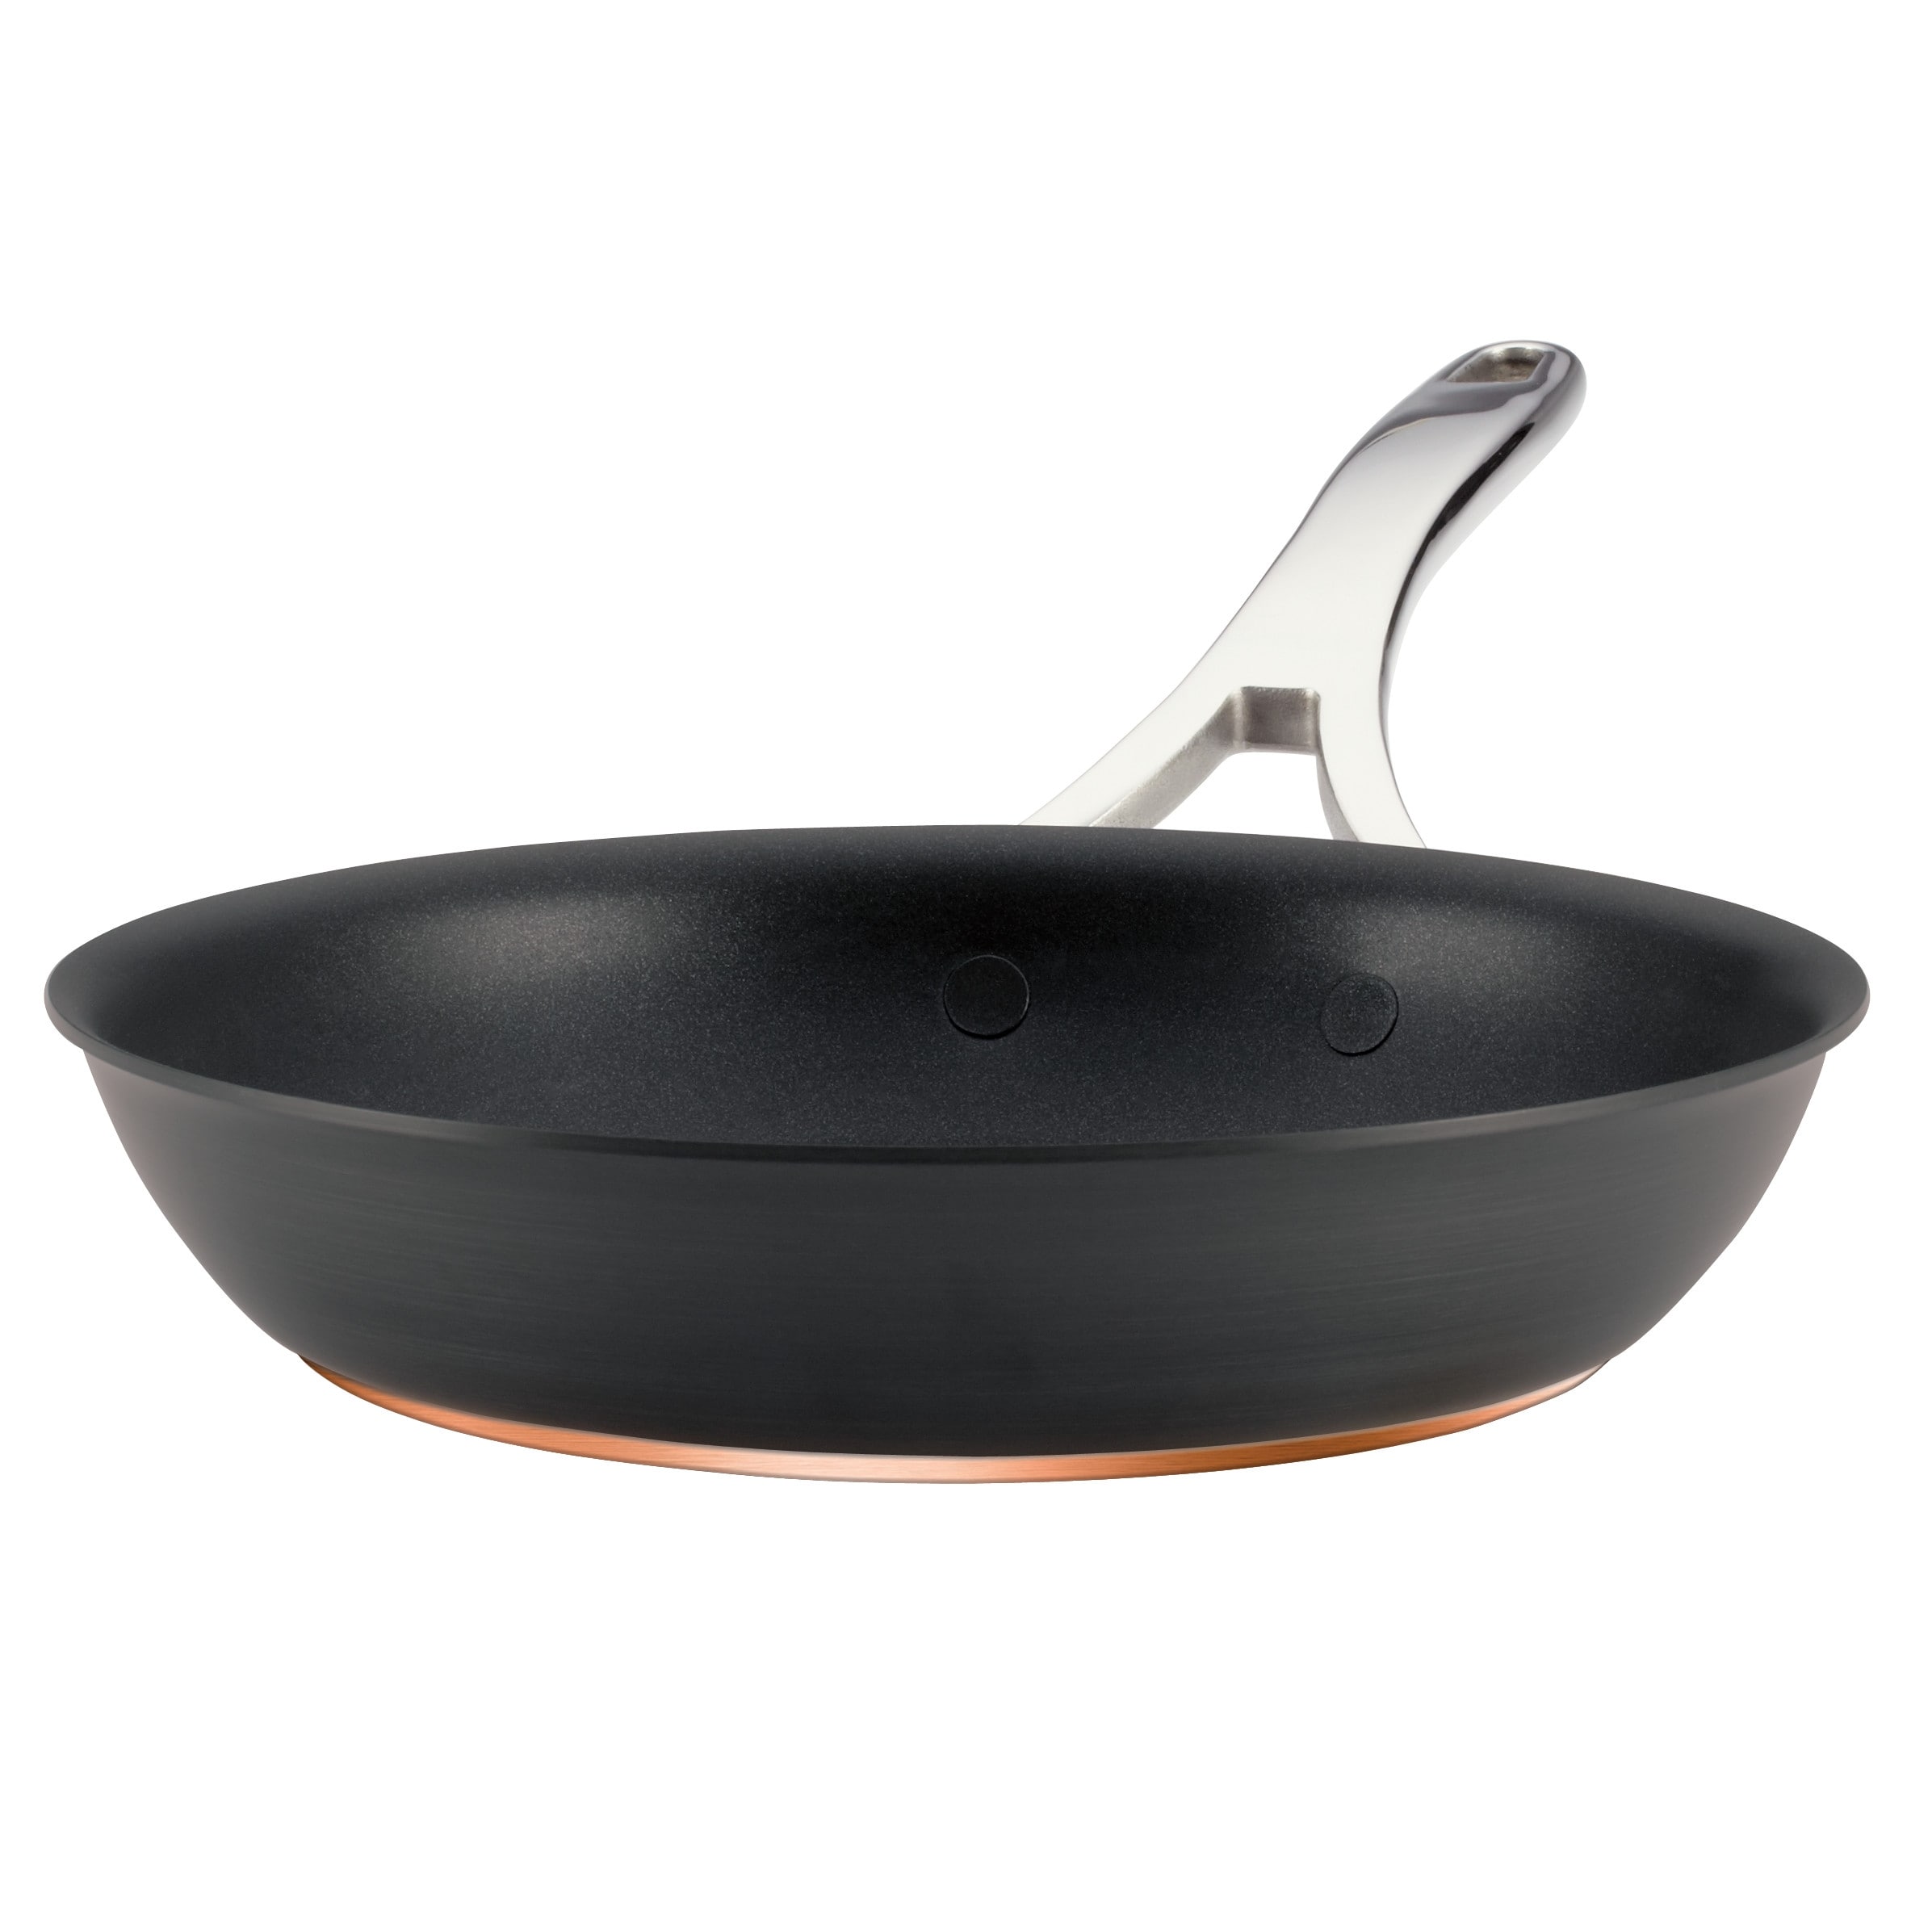 https://ak1.ostkcdn.com/images/products/is/images/direct/8ed9f3e28303464b237da6b6aca9a87e1ba4aa97/Anolon-Nouvelle-Copper-Stainless-Steel-and-Nonstick-Cookware-Induction-Pots-and-Pans-Set%2C-11-Piece%2C-Silver-and-Black.jpg